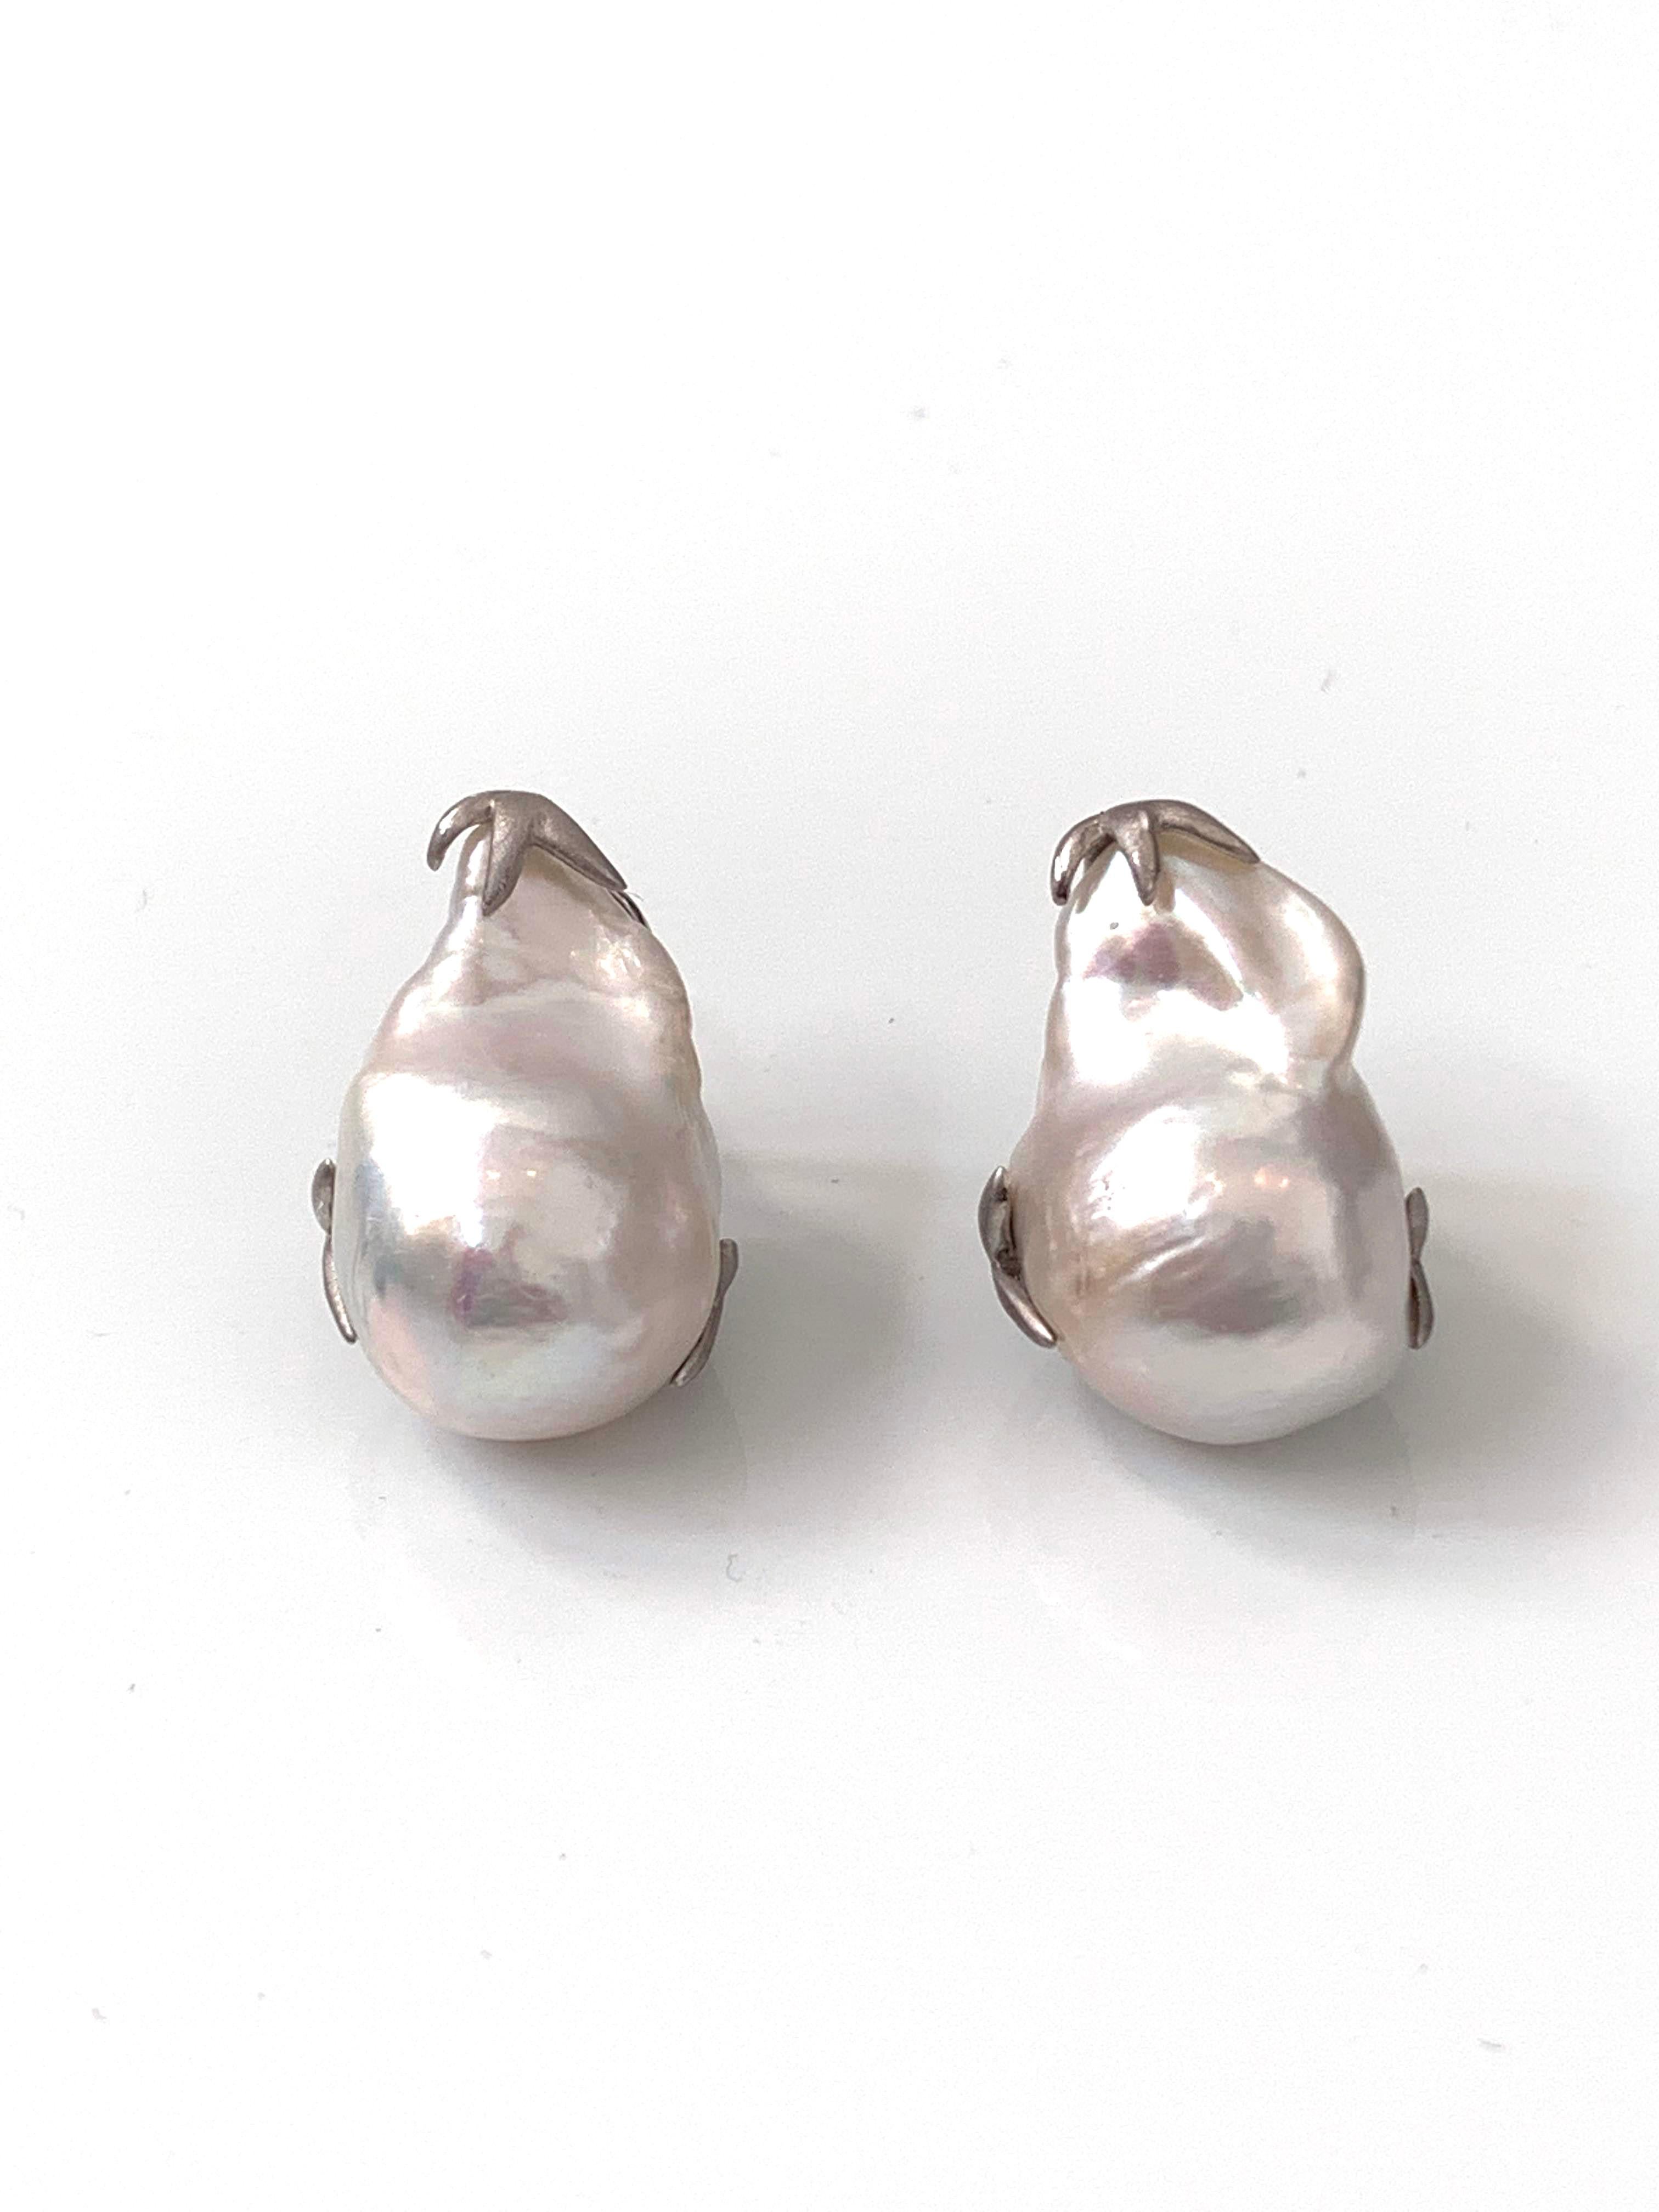 Beautiful pair of large lustrous freshwater baroque pearl earrings. The pair measures 15mm width and 23mm height, handset in platinum-plated sterling silver (matte finish). Post-clip backs provide addition support (Very comfortable). 

Each pair is